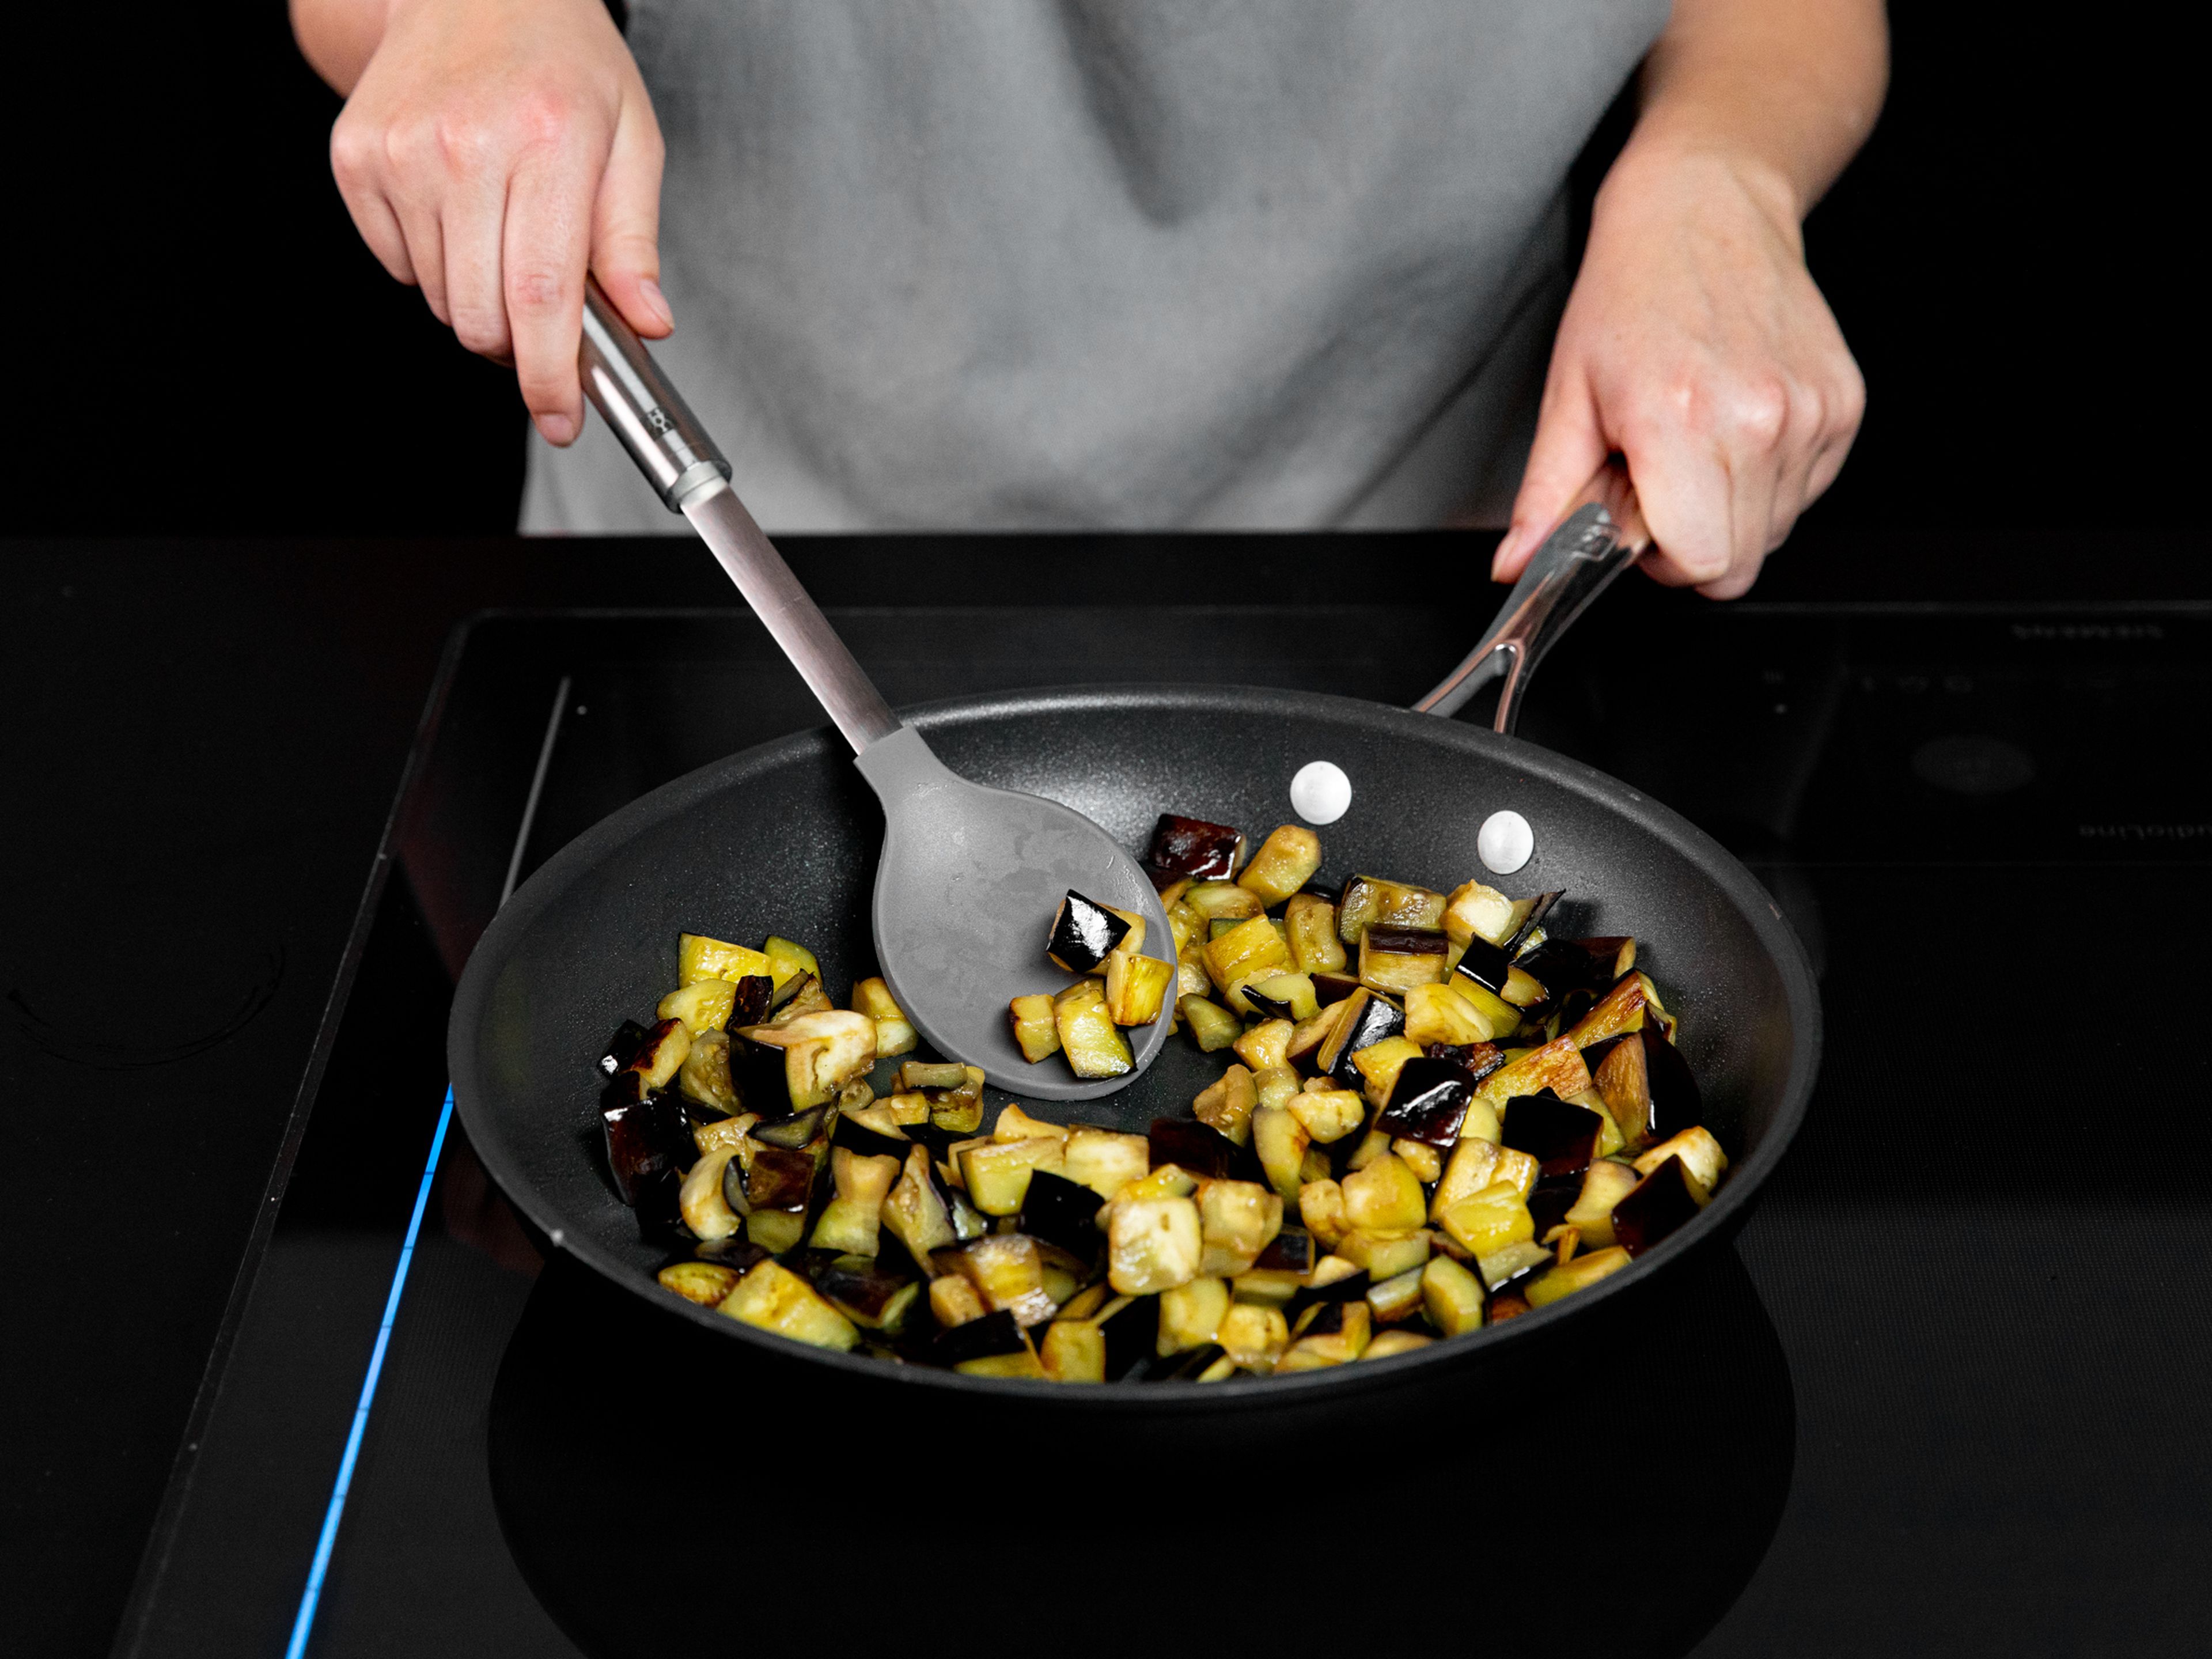 Add some olive oil to a frying pan over medium heat. Add eggplant and fry for approx. 6 – 8 min. or until golden brown. Remove eggplant from the pan.